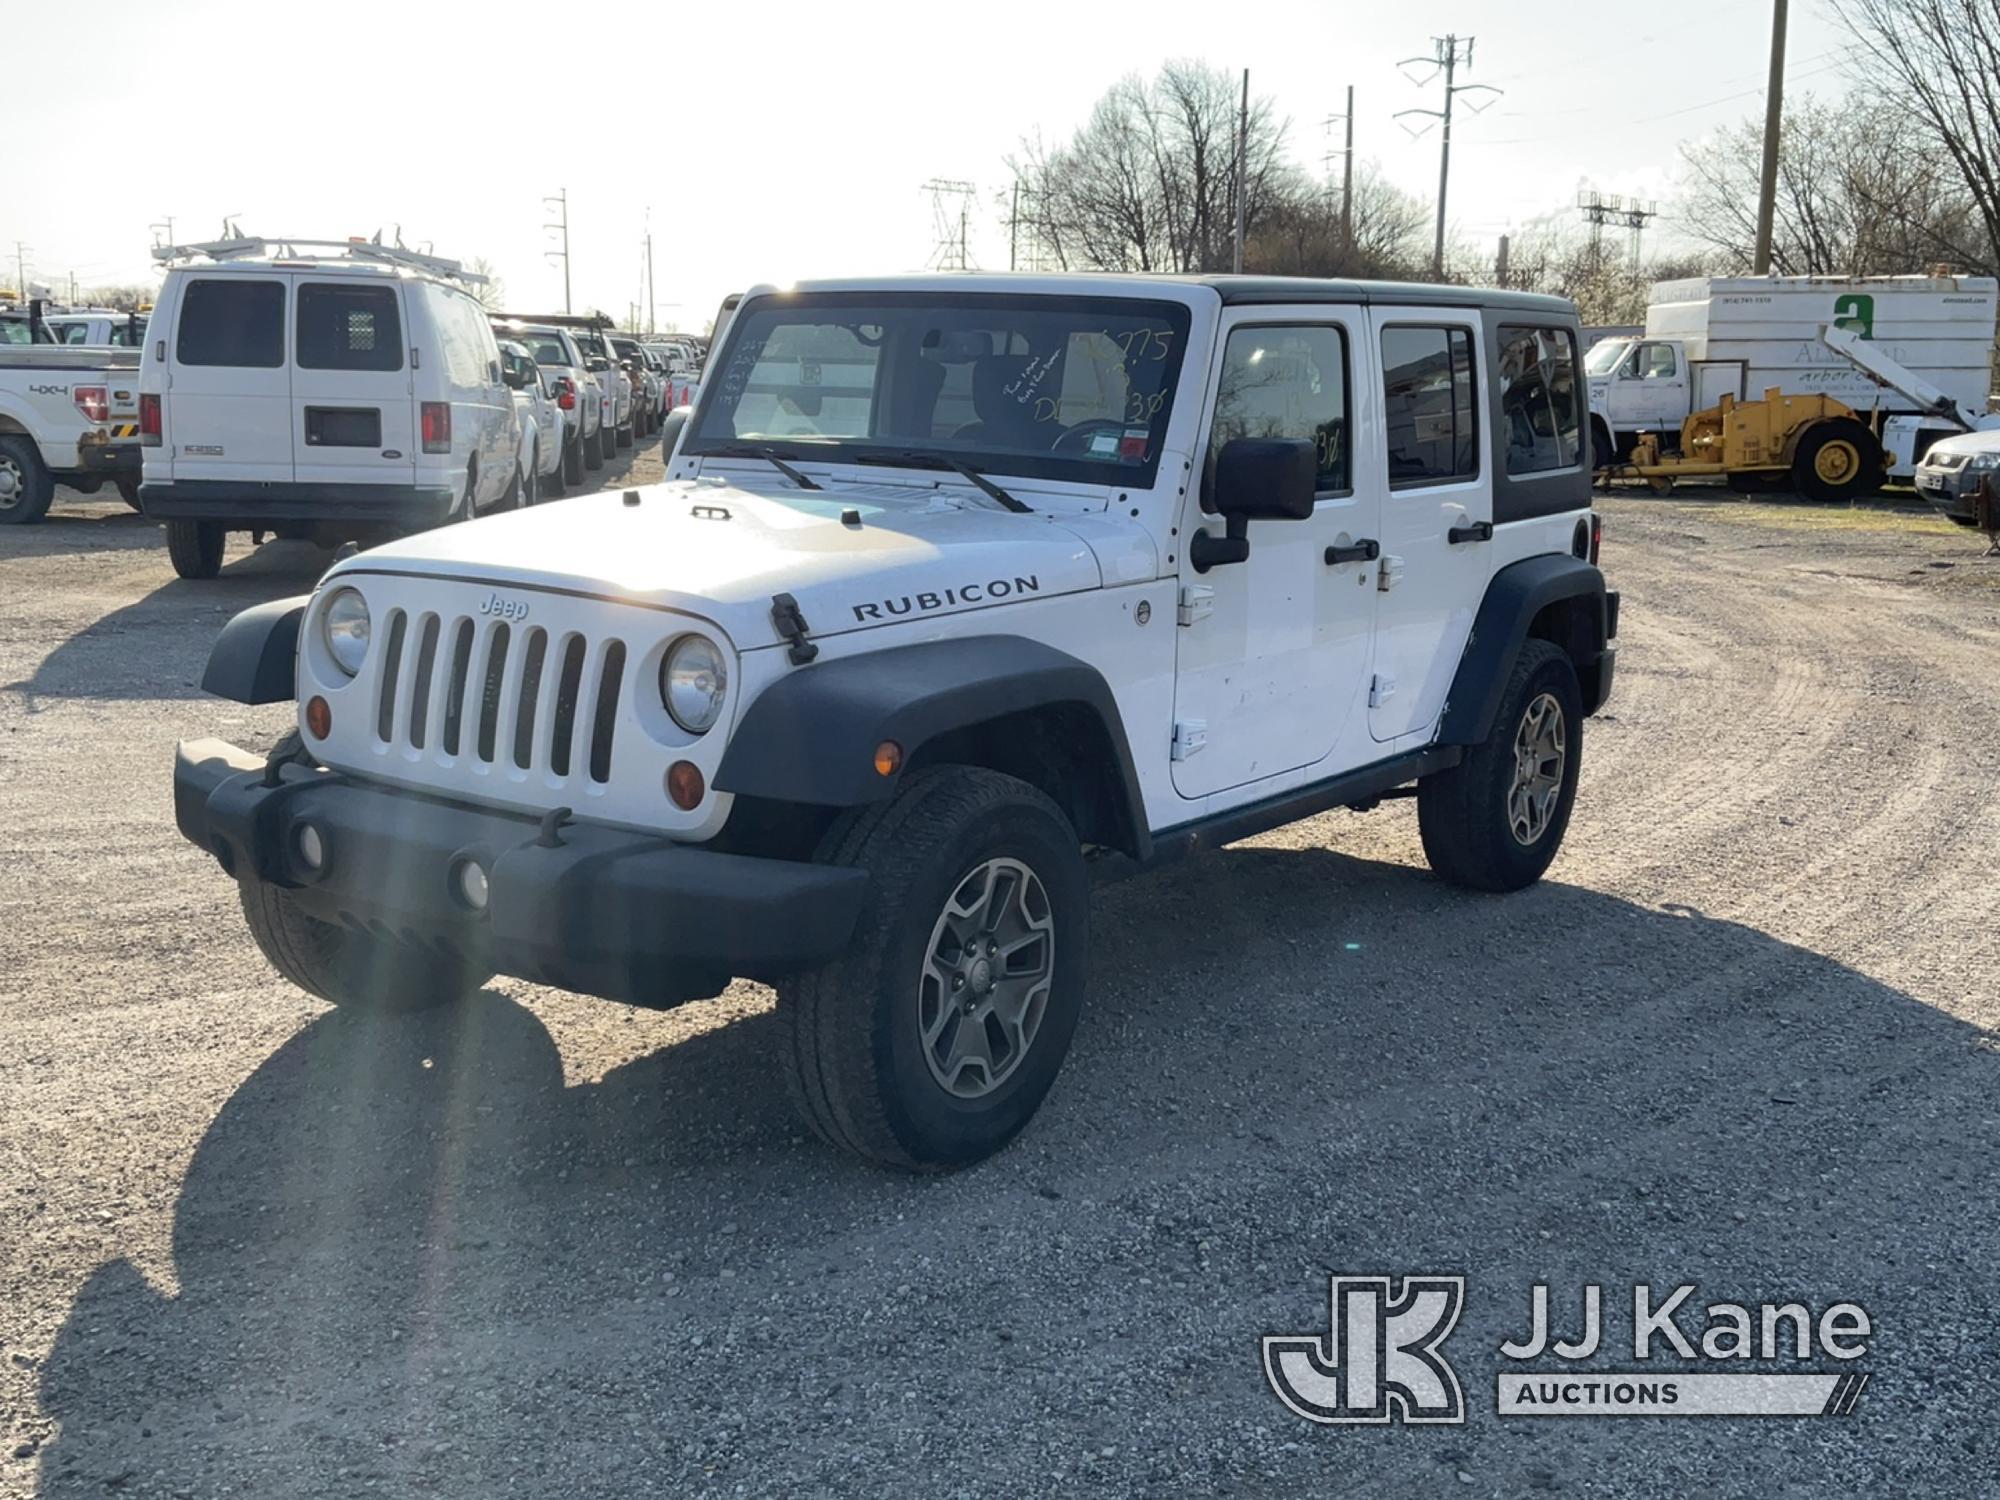 (Plymouth Meeting, PA) 2013 Jeep Wrangler Rubicon 4x4 4-Door Sport Utility Vehicle Runs & Moves, Bod